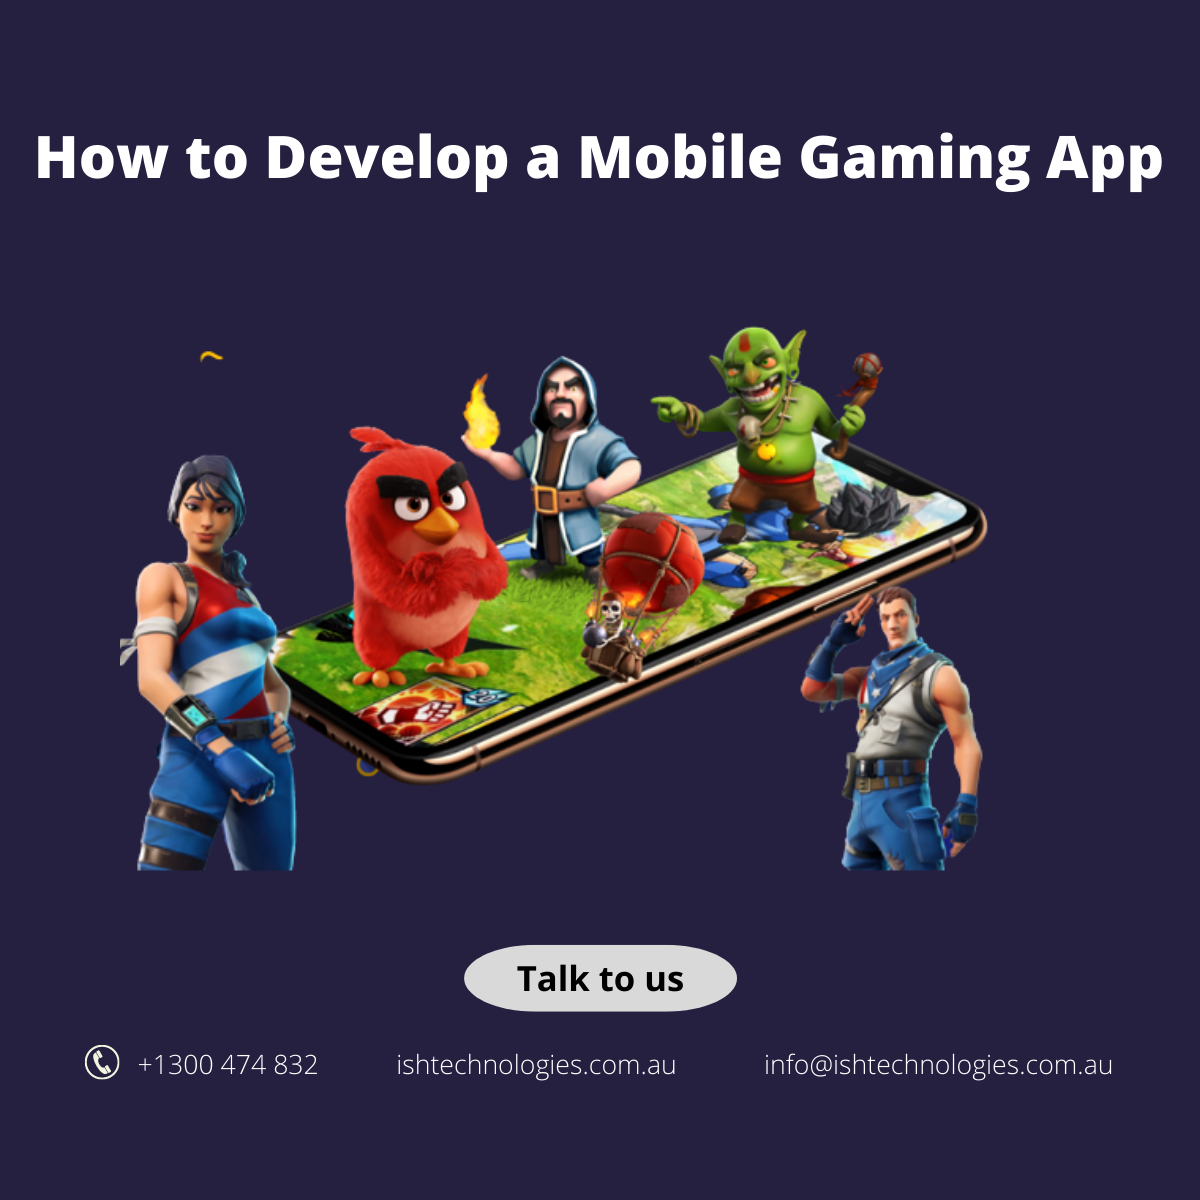 How to Develop a Mobile Gaming App